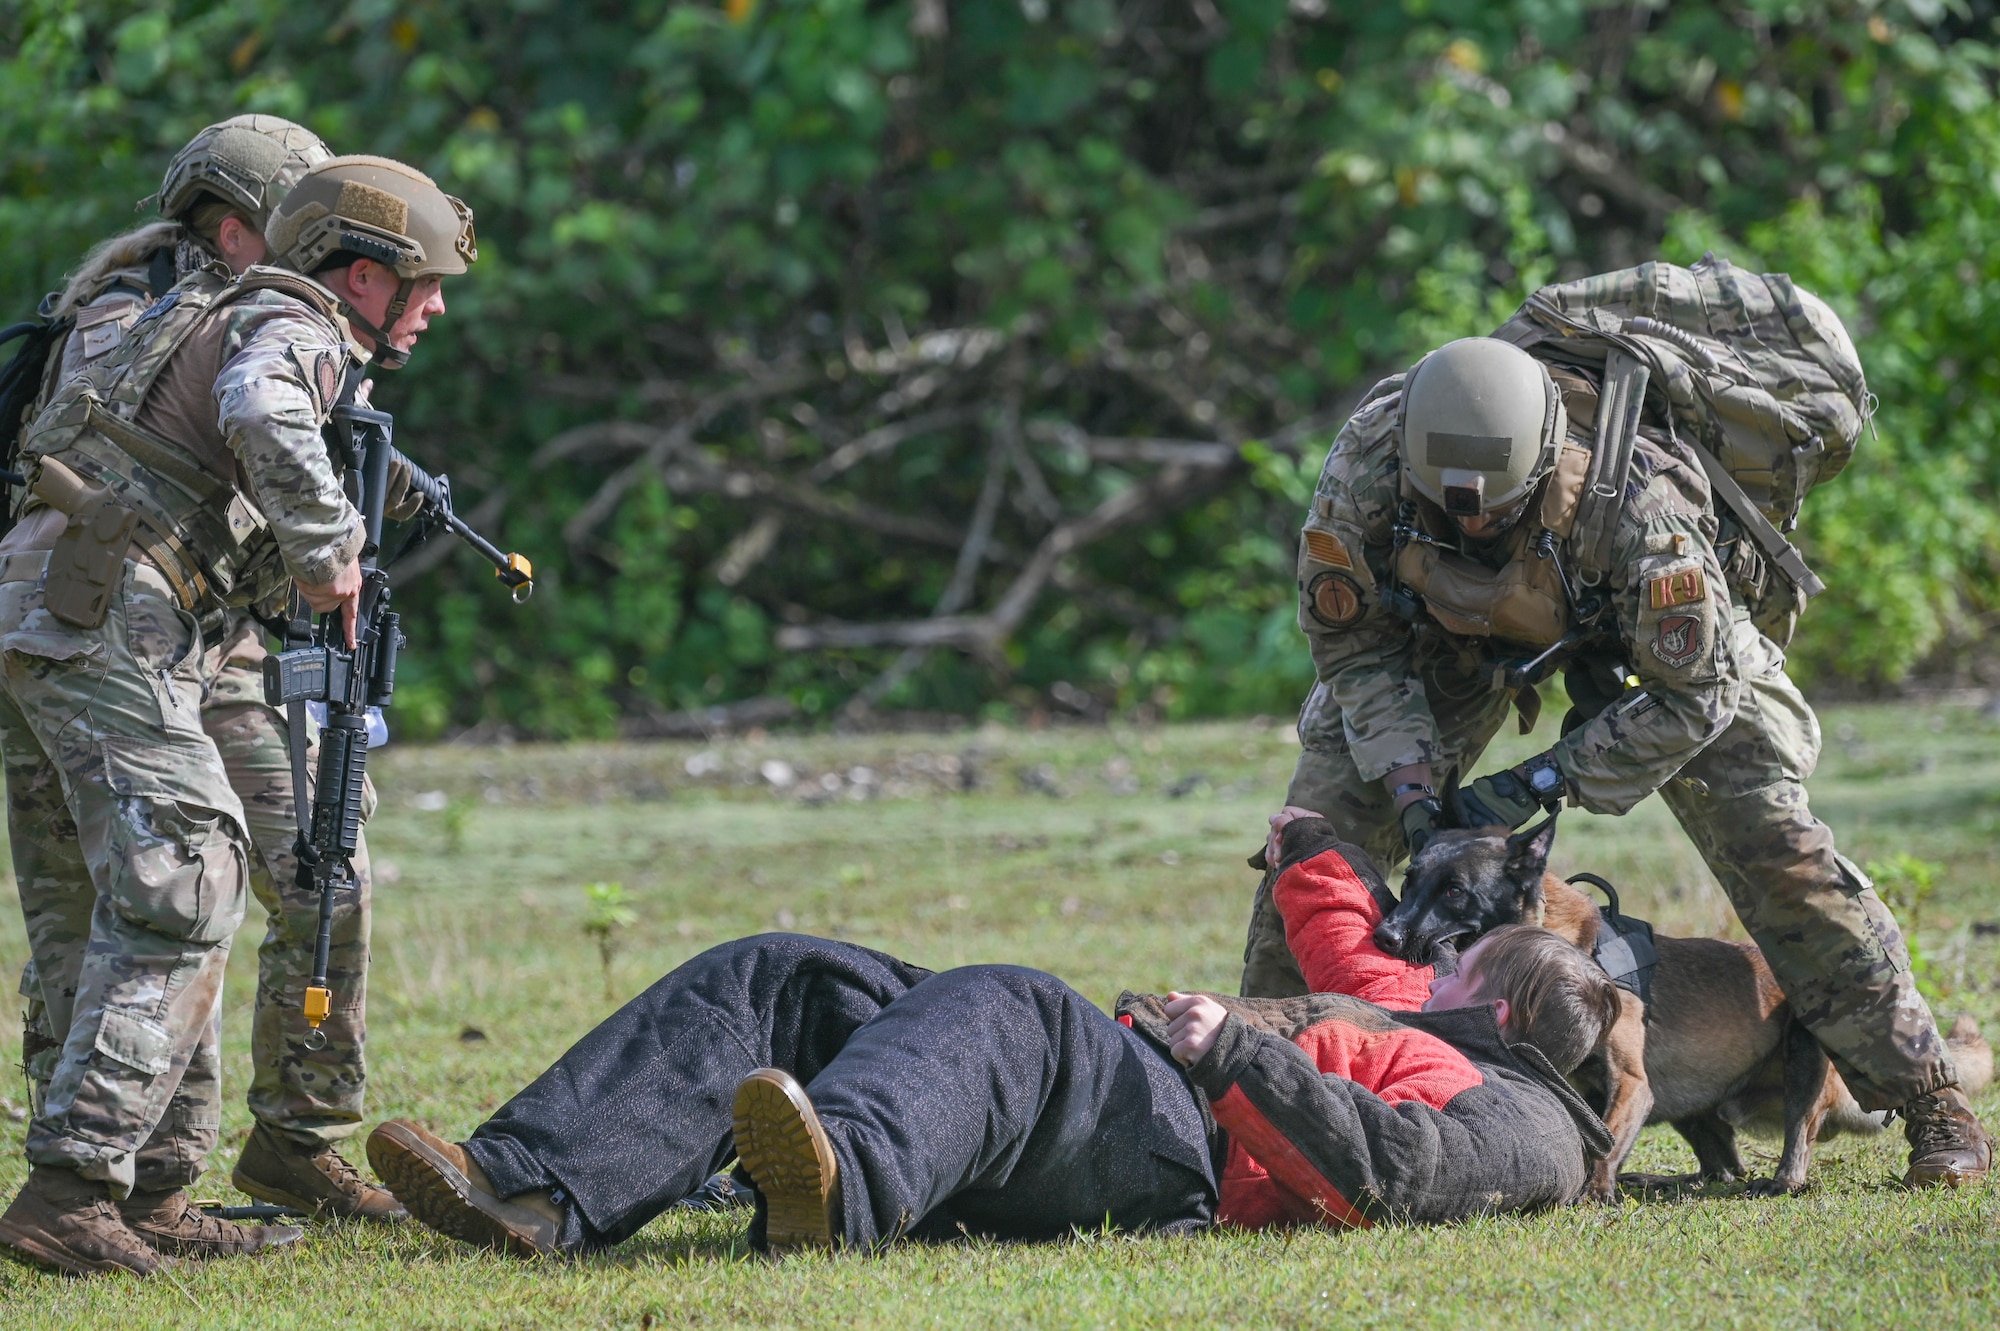 Airmen searching a suspect.